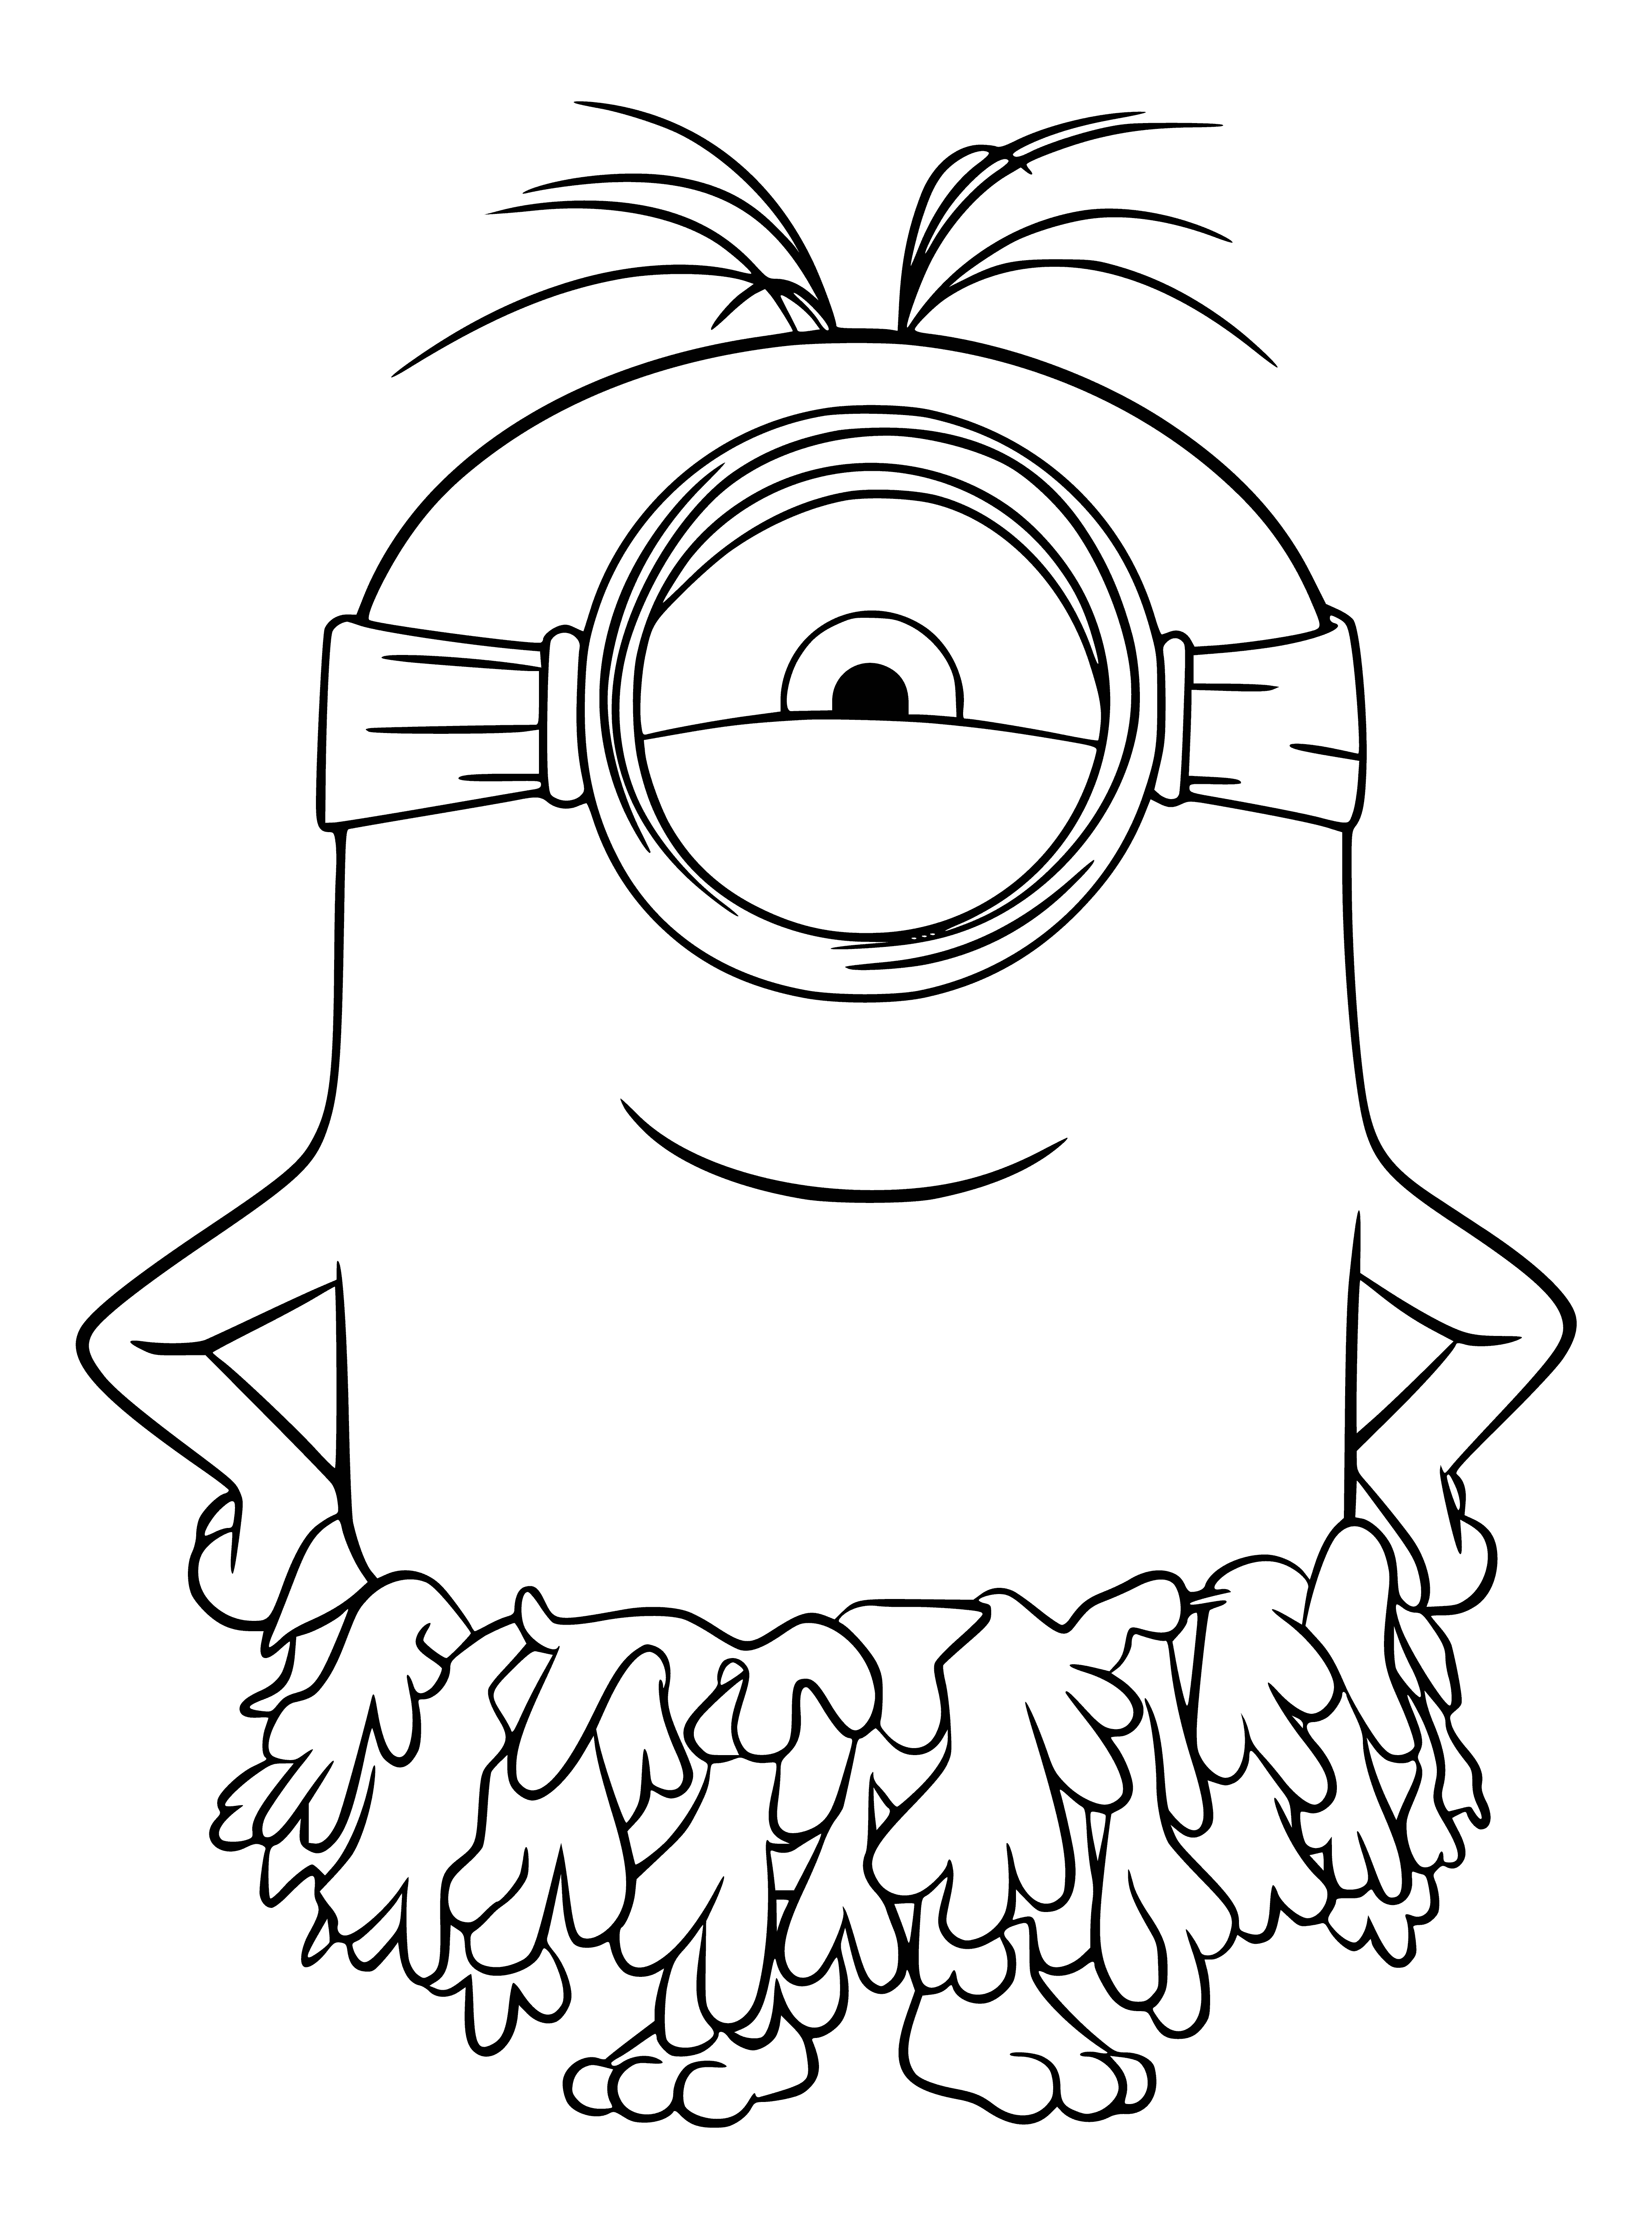 coloring page: Minion in Hawaiian skirt holds a drink, arms out, standing by a palm tree in coloring page.